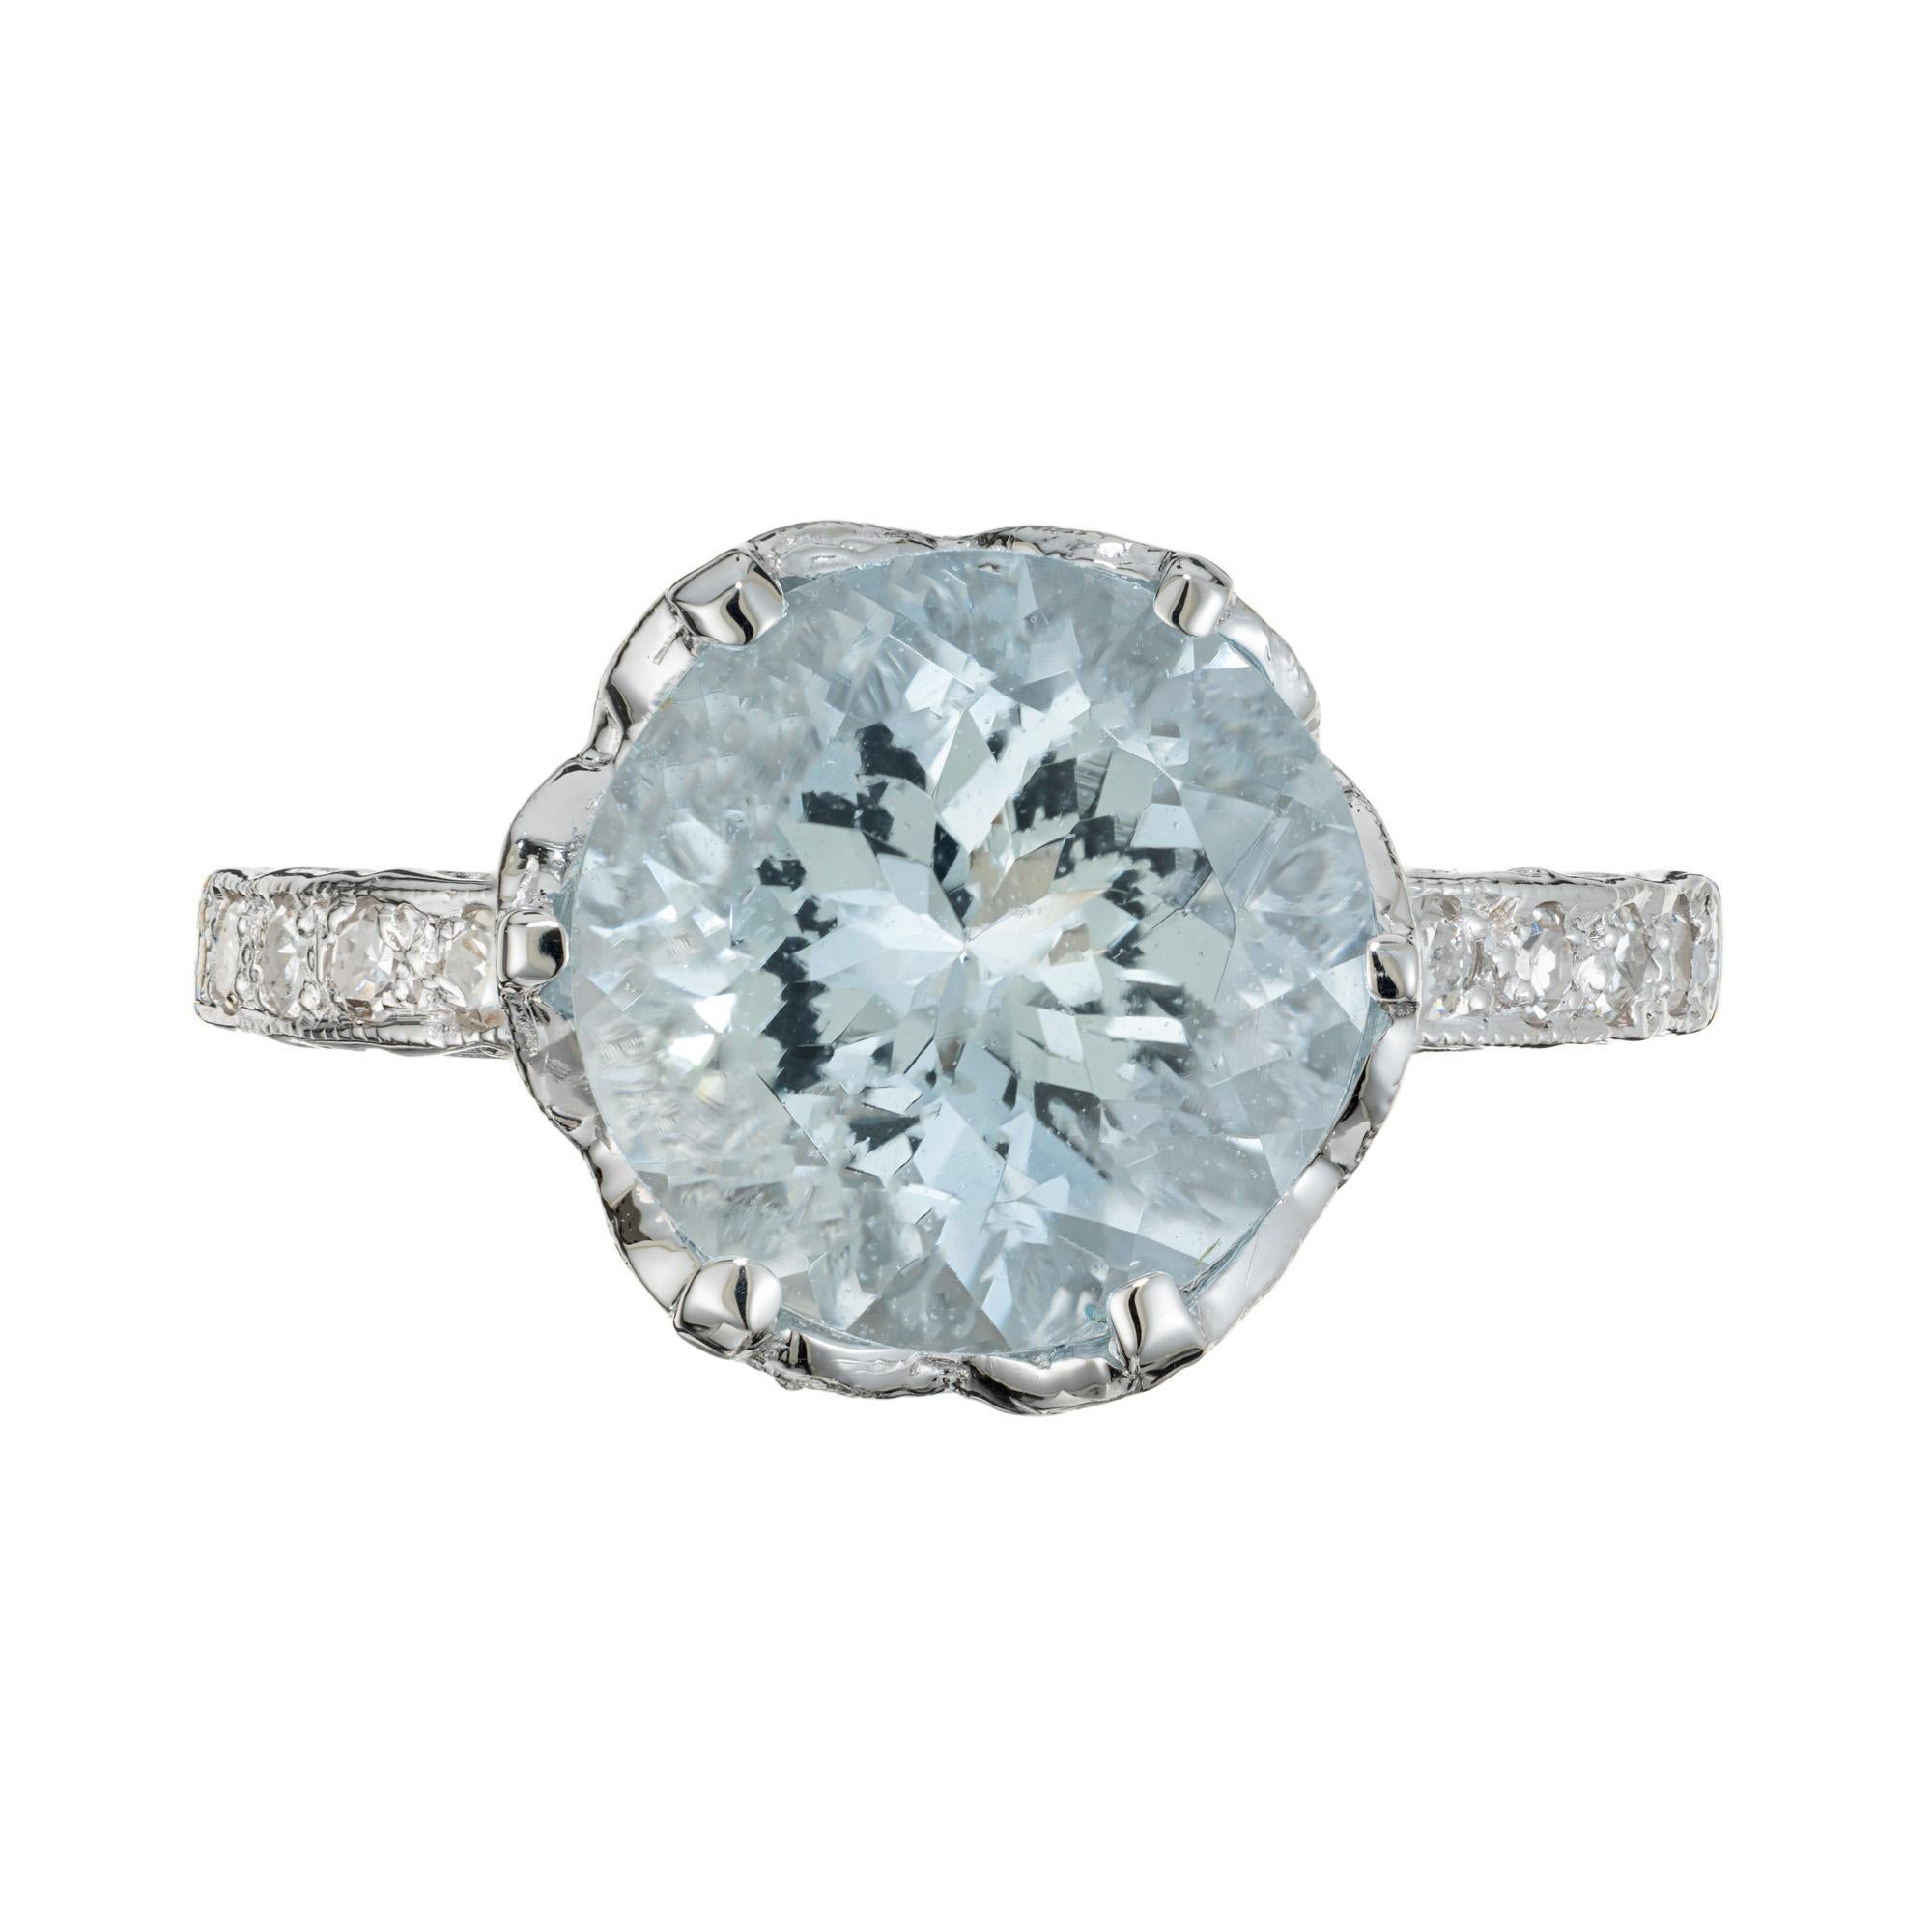 1930's Vintage Kings Crown design aquamarine and diamond ring. Round 3.42ct Aqua mounted in a platinum six prong setting with 32 accent diamonds around the crown and both shoulders of the shank. The crown sits high off the finger and has beautifully